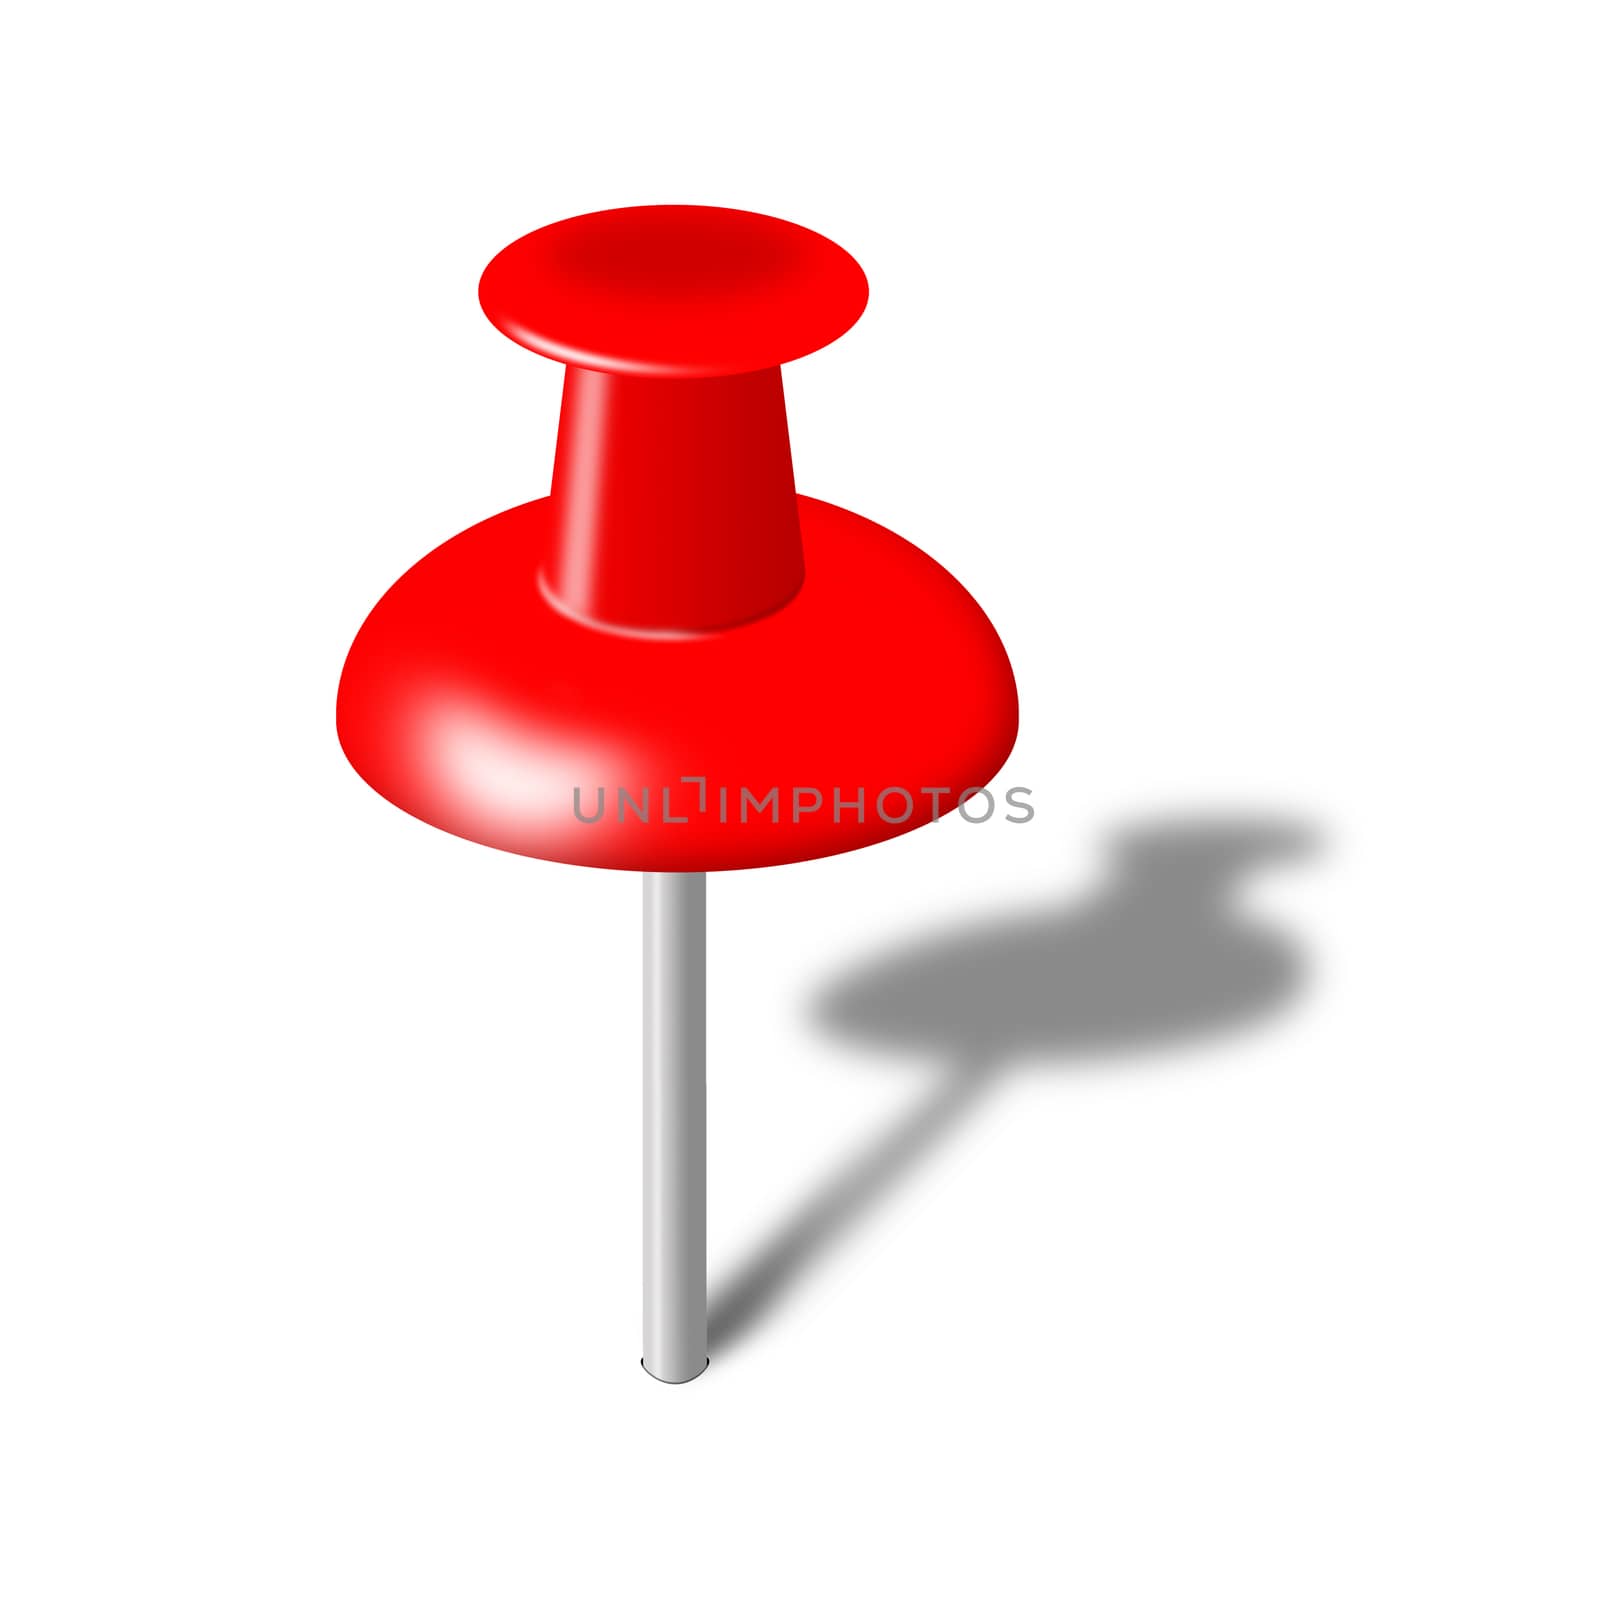 A red pushpin illustration isolated on white with shadow